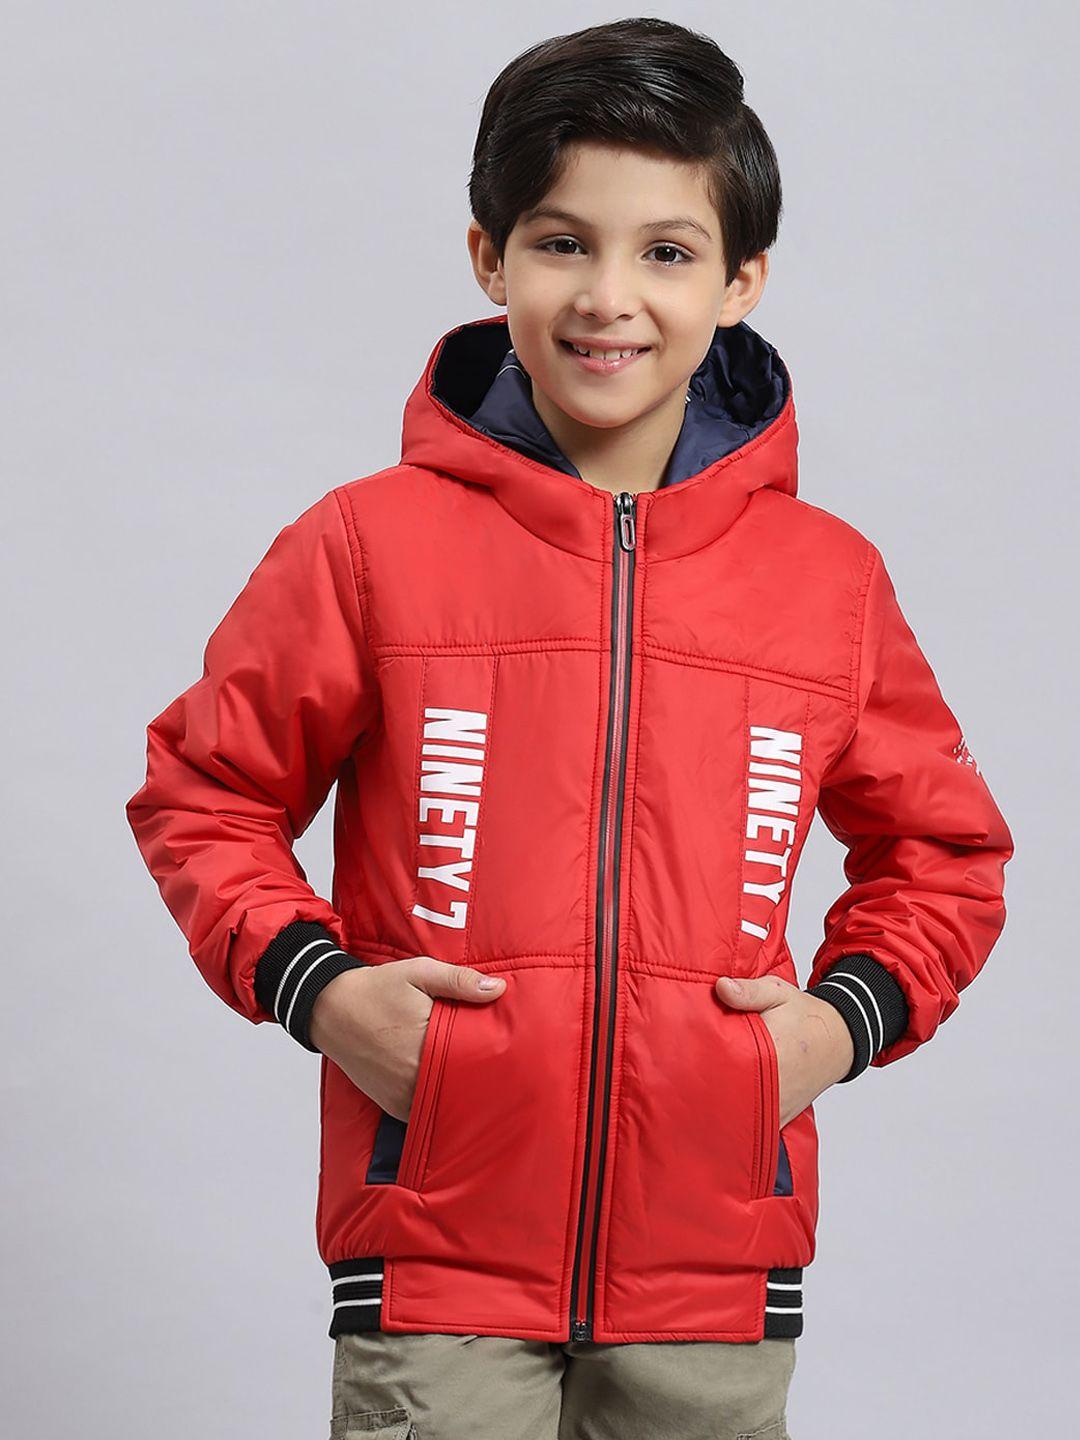 monte carlo boys typography printed hooded lightweight bomber jacket